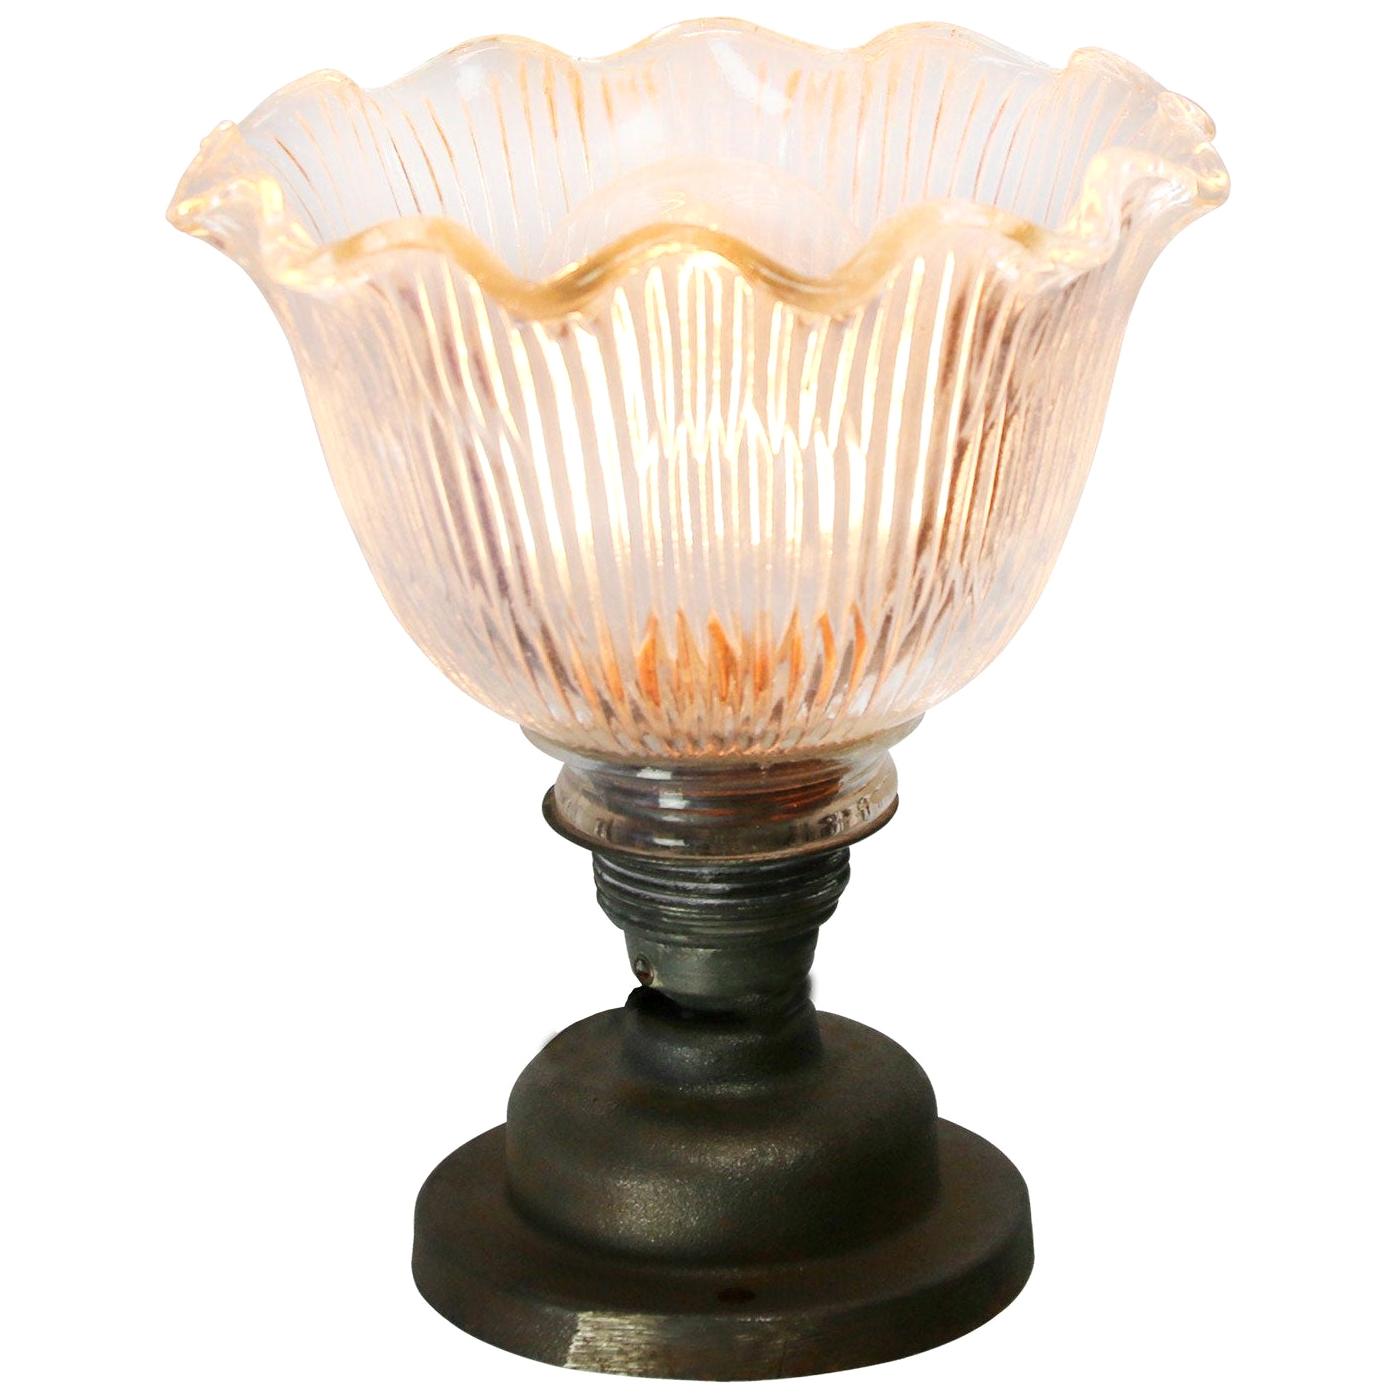 Holophane glass wall light
metal E27 bulb holder with clear striped glass shade
cast iron wall mount diameter 10 cm
wall lamp / ceiling scone

Weight: 1.40 kg / 3.1 lb

Priced per individual item. All lamps have been made suitable by